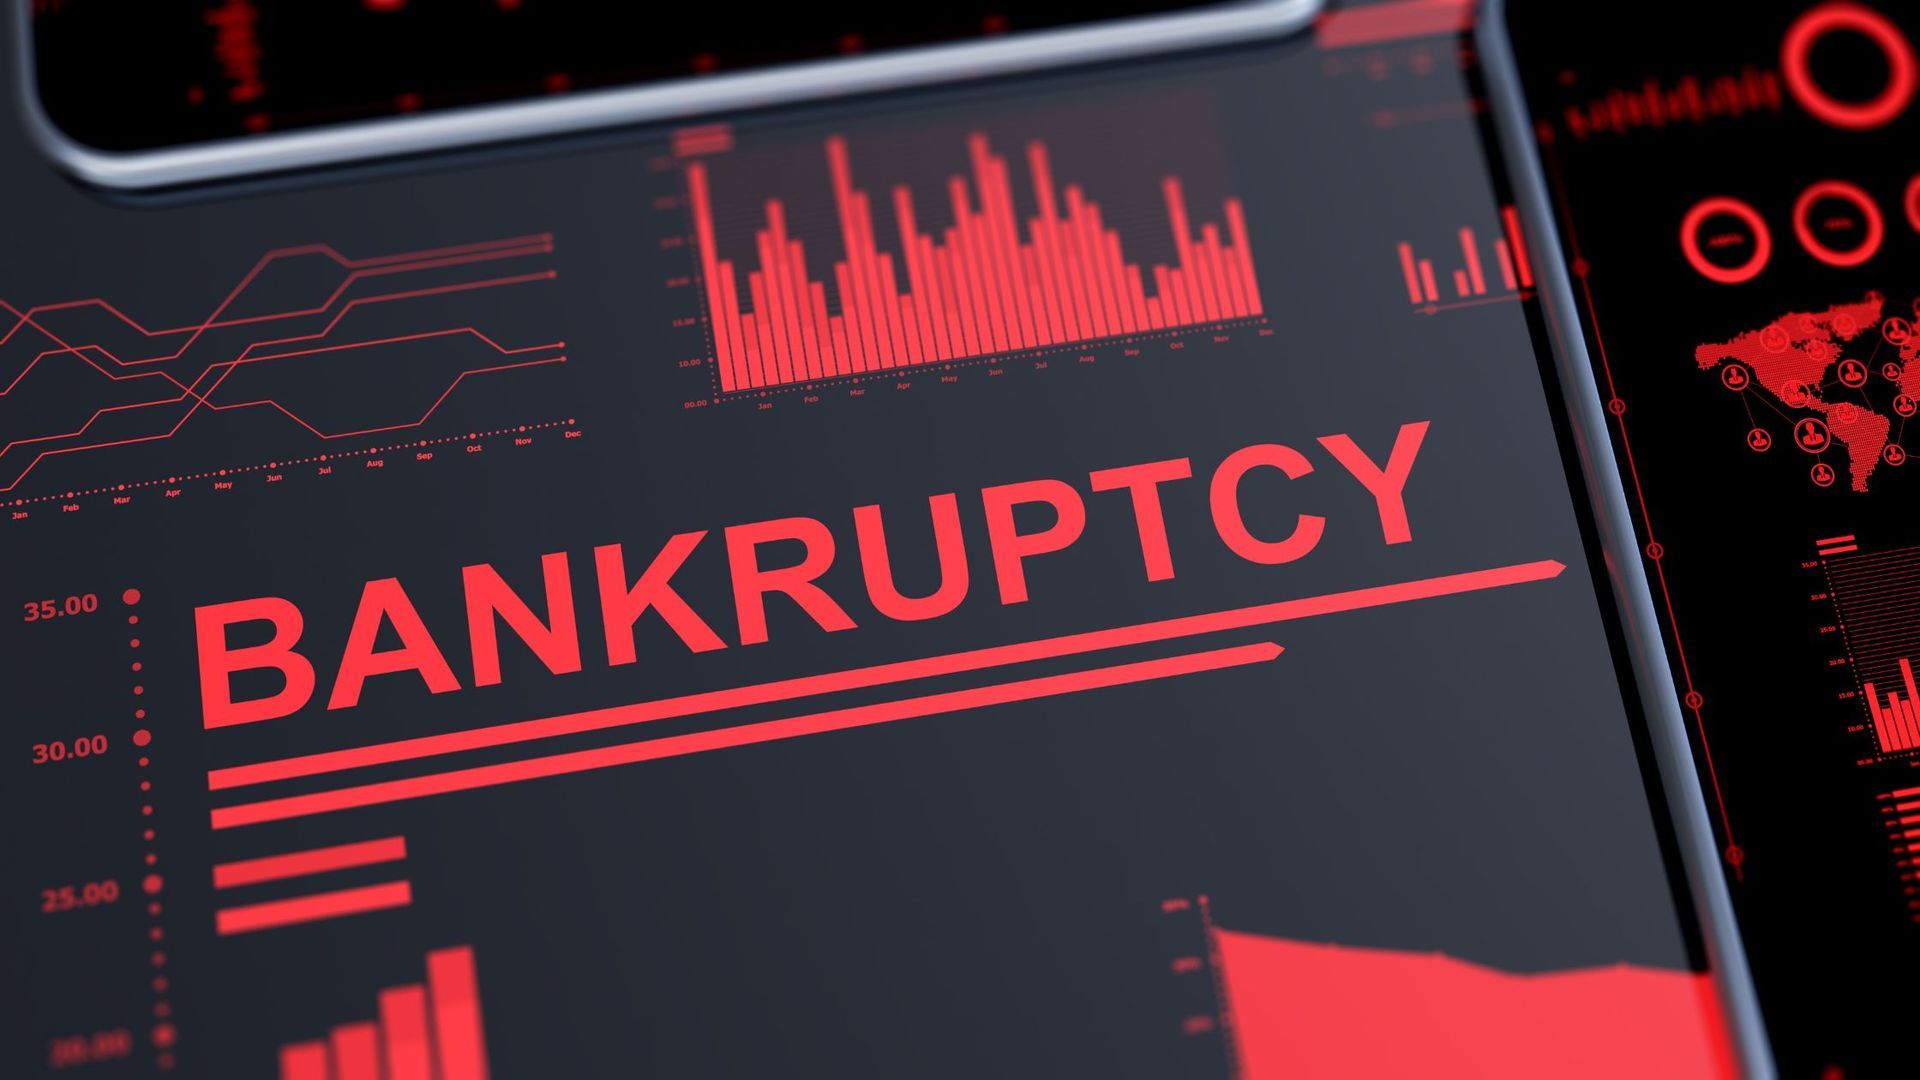 chapter 11 vs chapter 13 bankruptcy